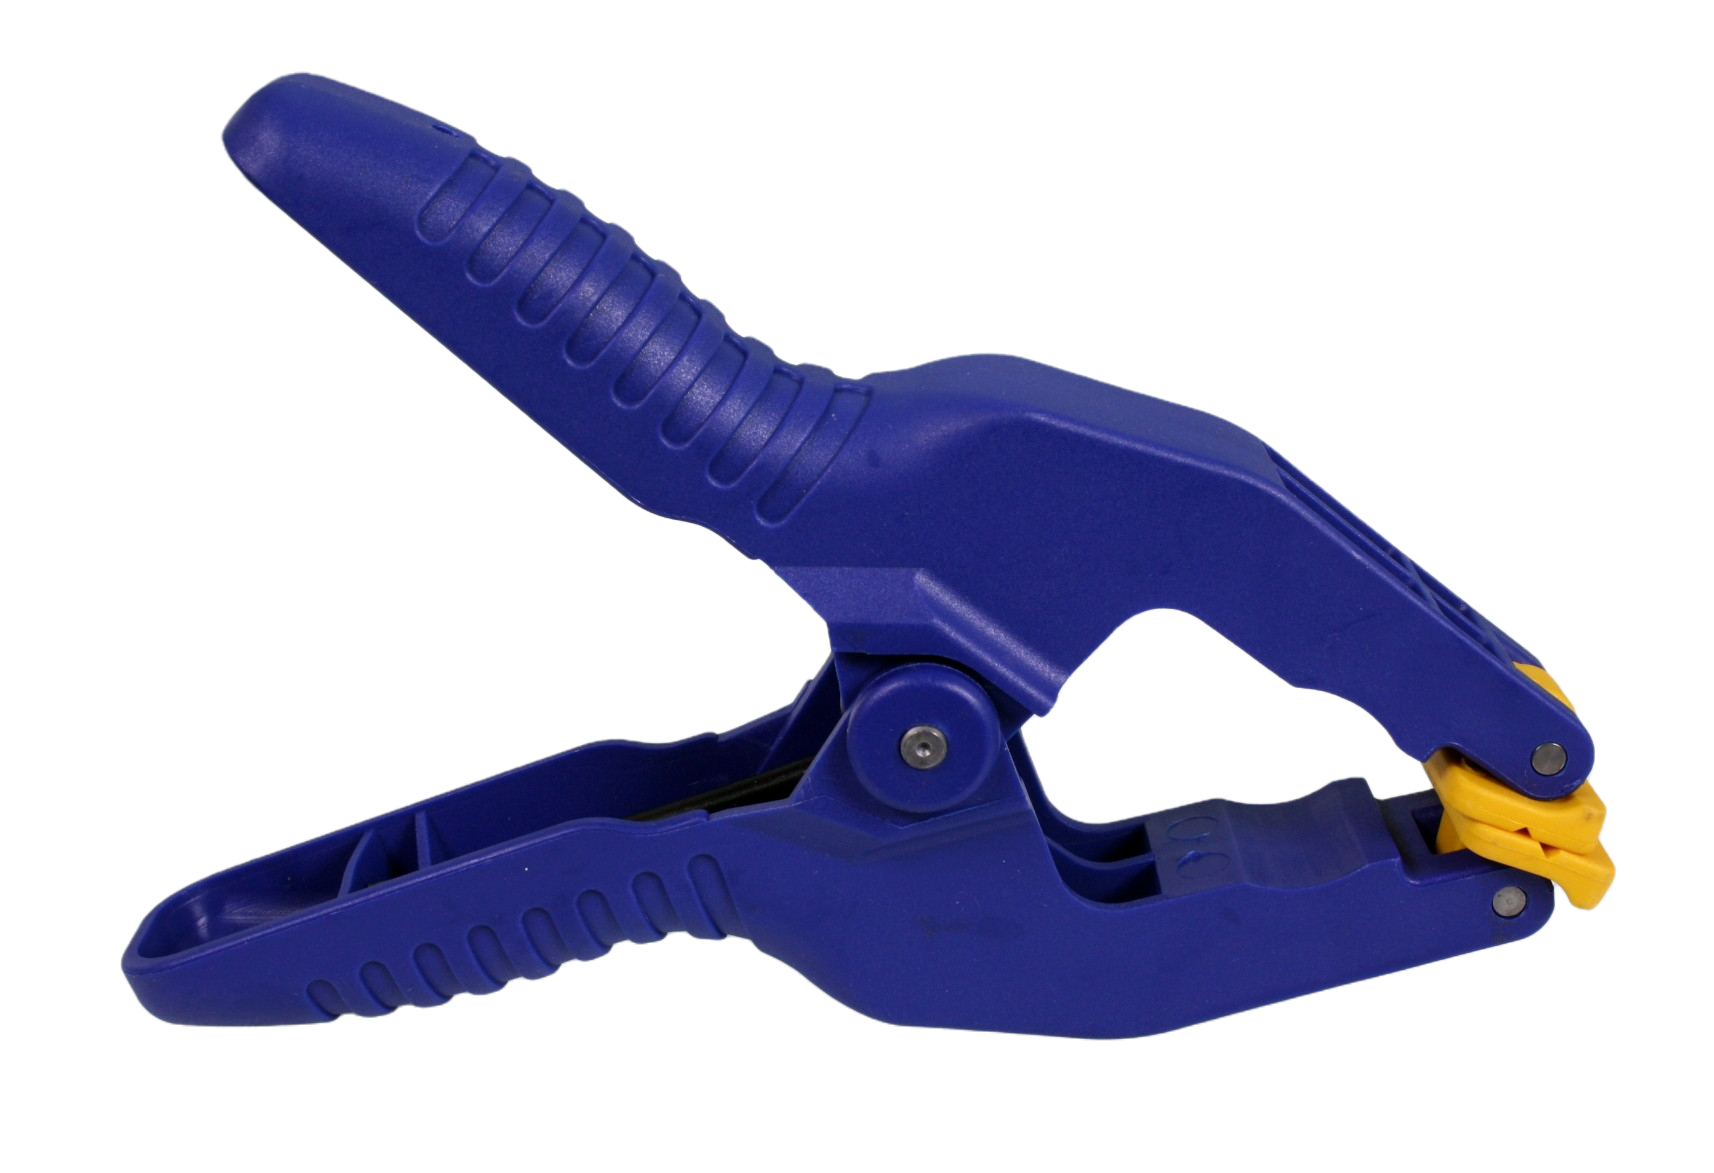 Single clamp, side view